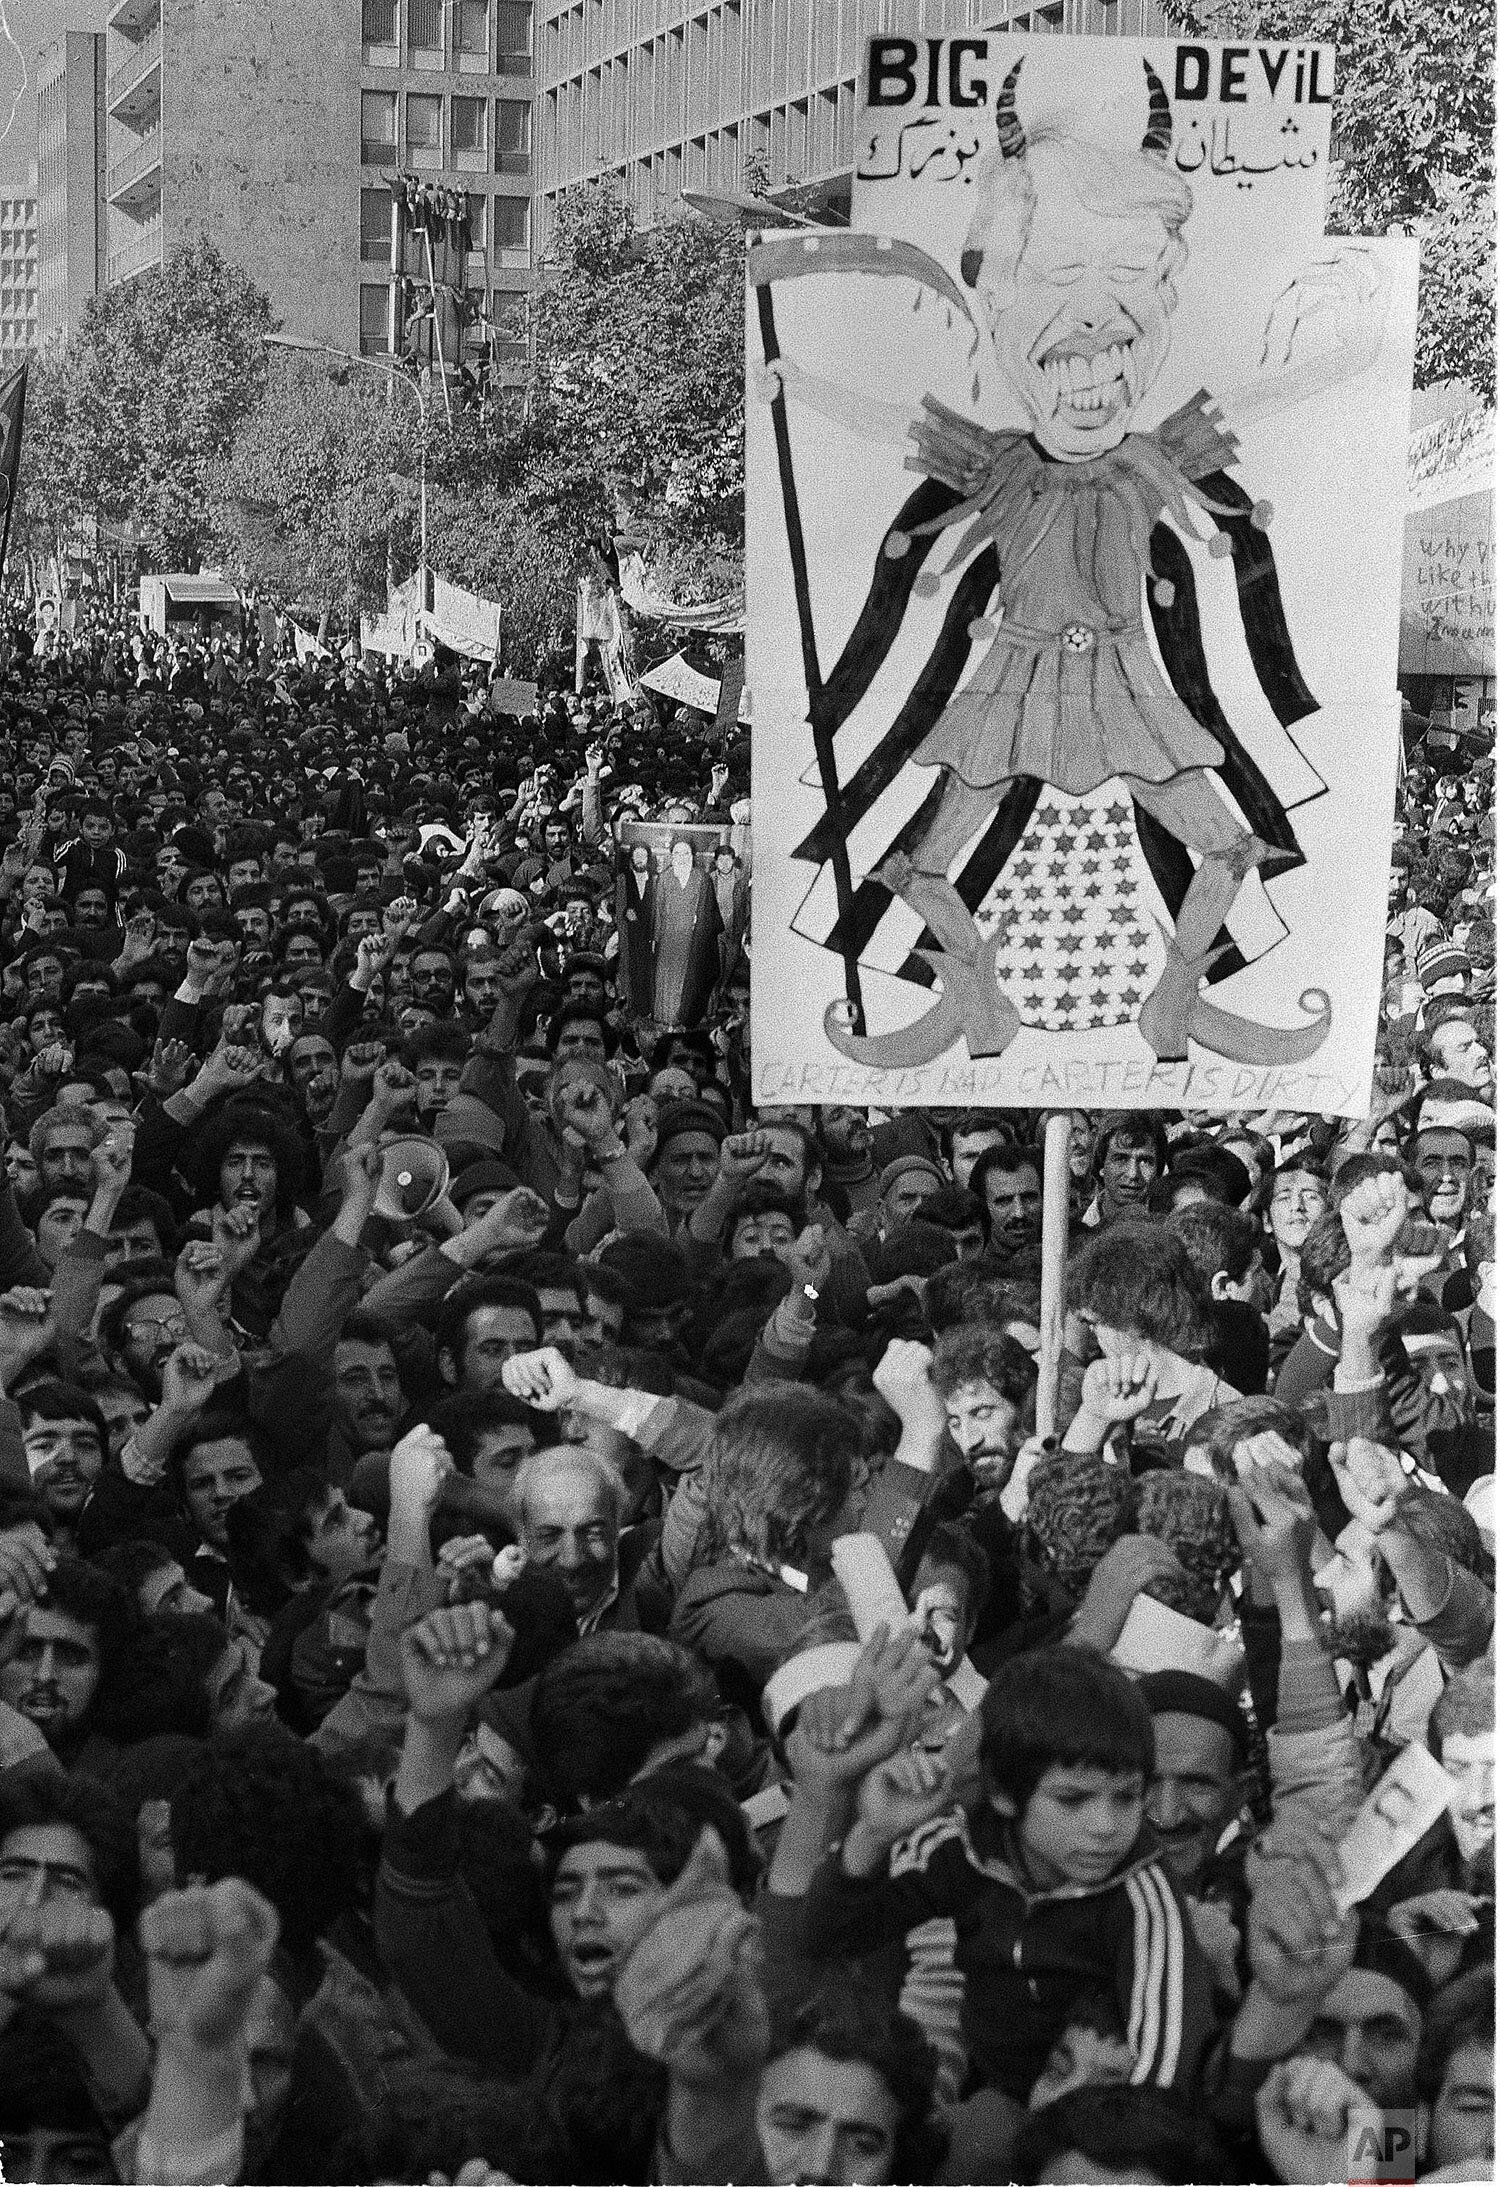  A banner depicting President Carter as a devil is carried by Iranian crowds during an anti-American march in Tehran, Nov. 21, 1979.  (AP Photo/Mohammad Sayad) 